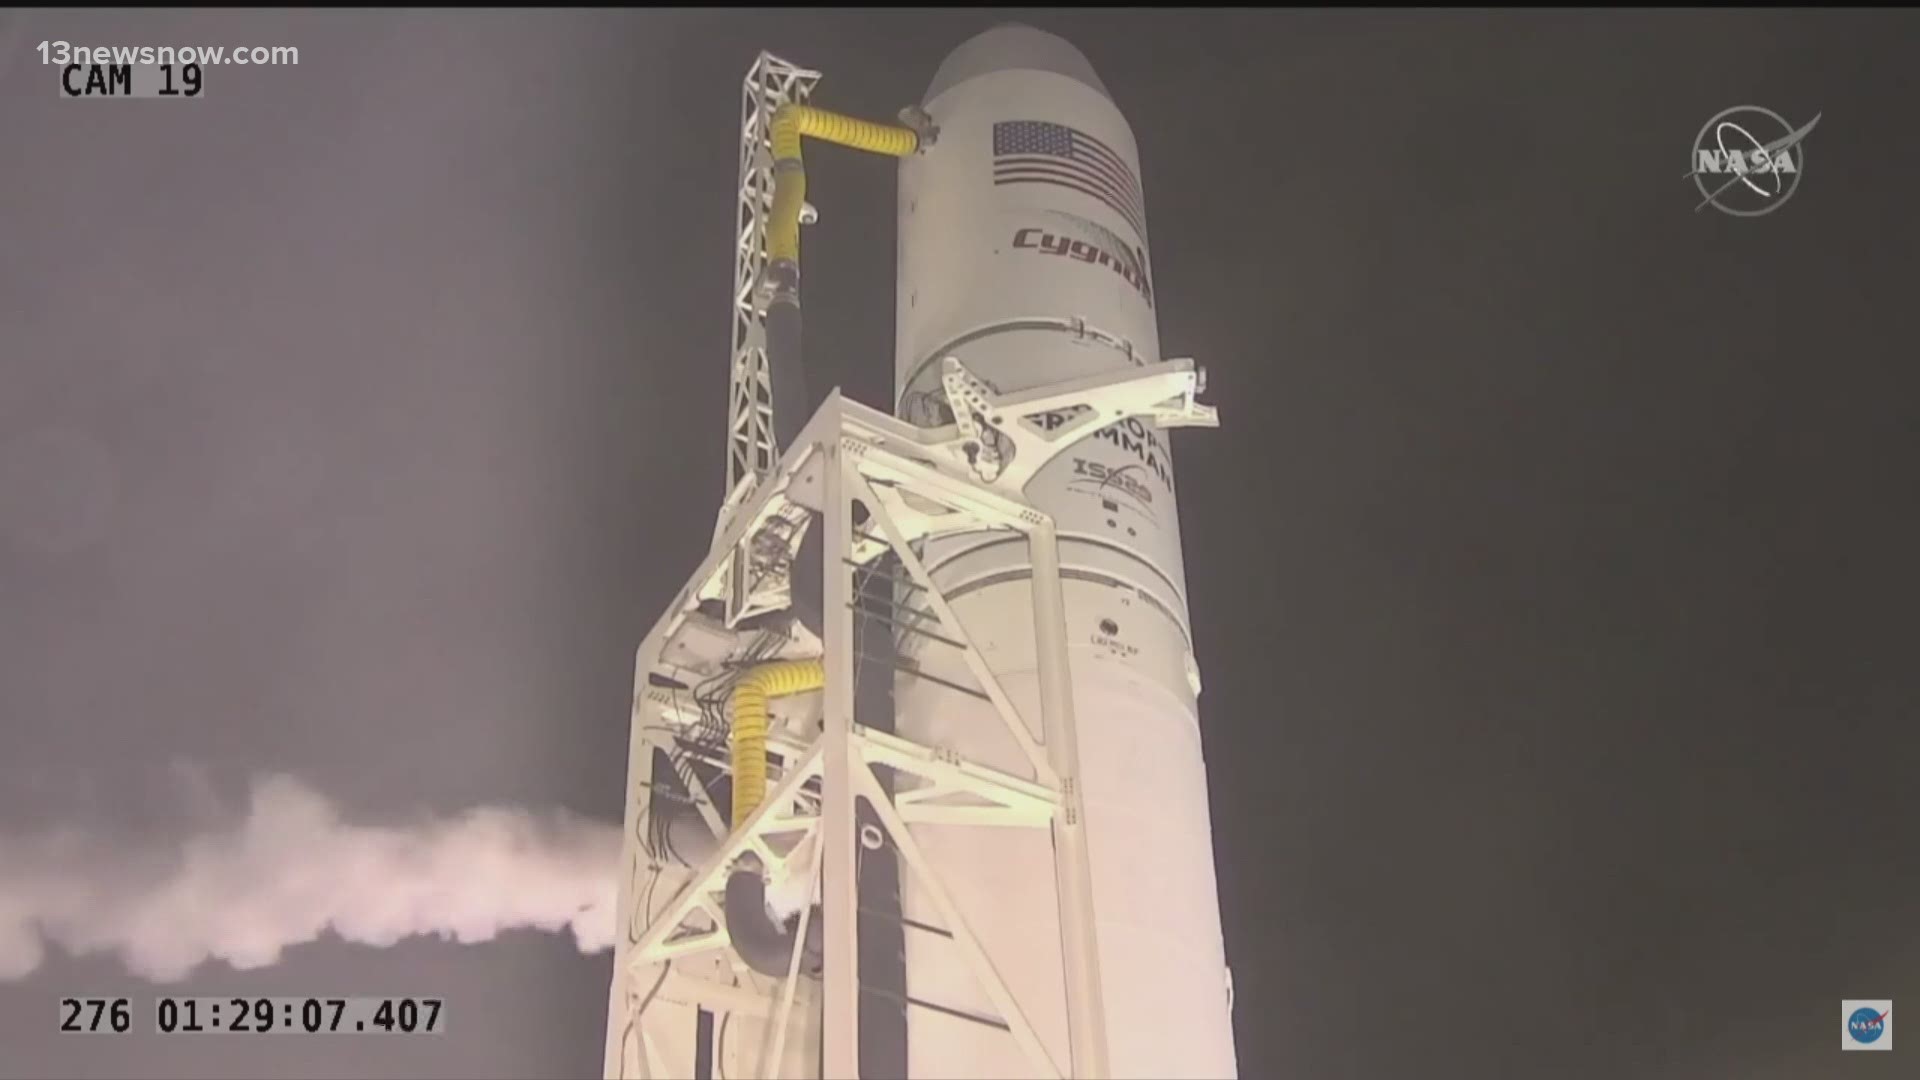 Thursday night's scheduled launch of an Antares rocket was aborted at about t-minus 2:40 before liftoff.